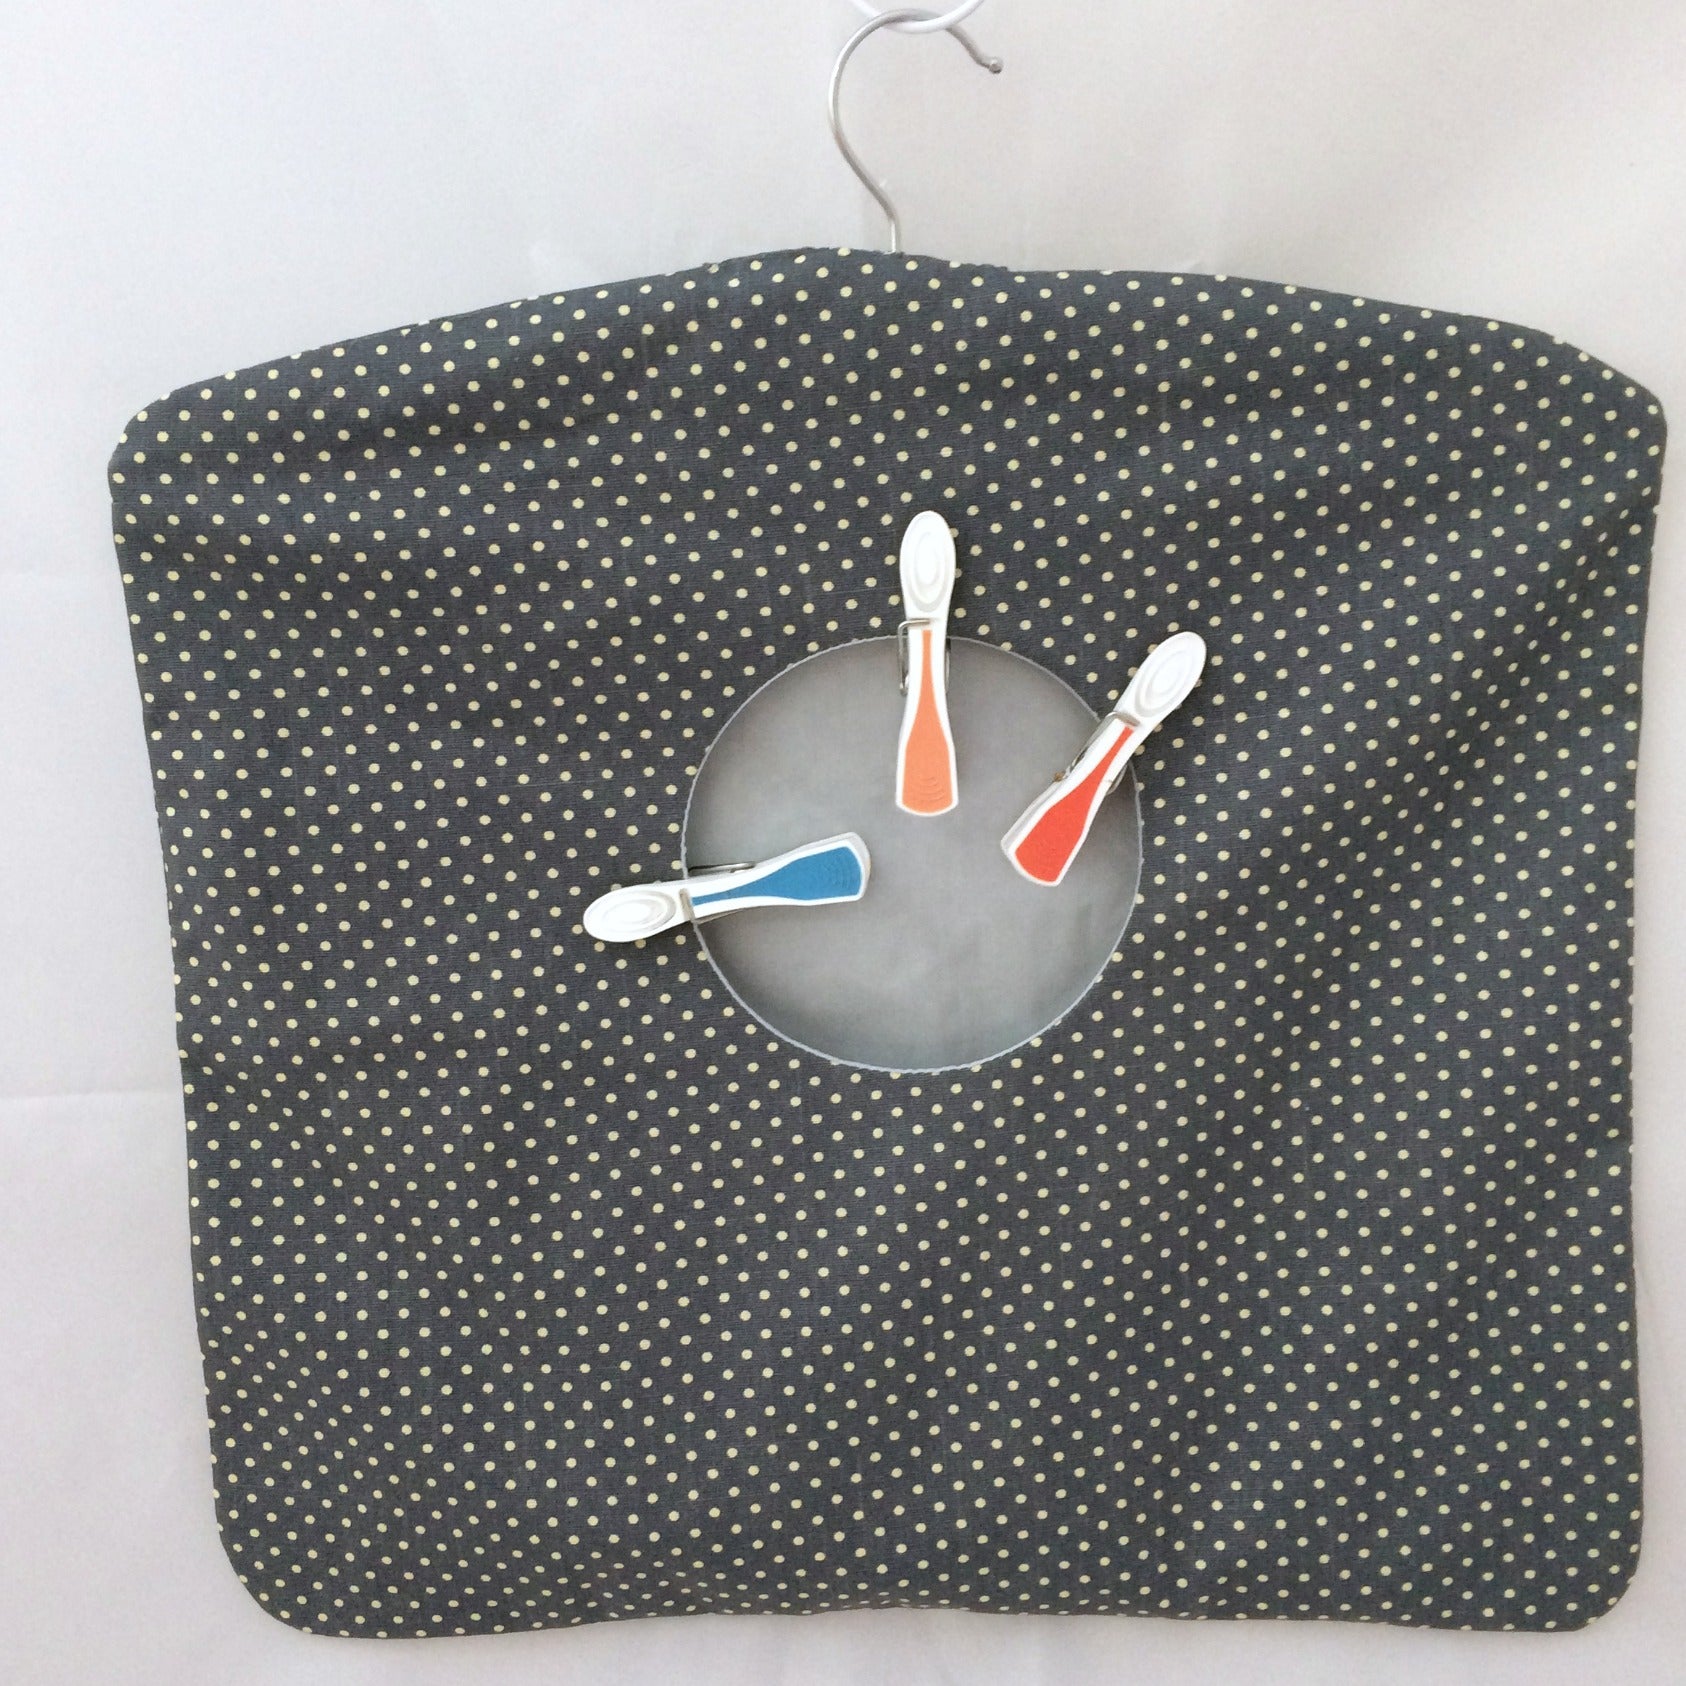 Clothes pin peg bag in a grey spotted fabric